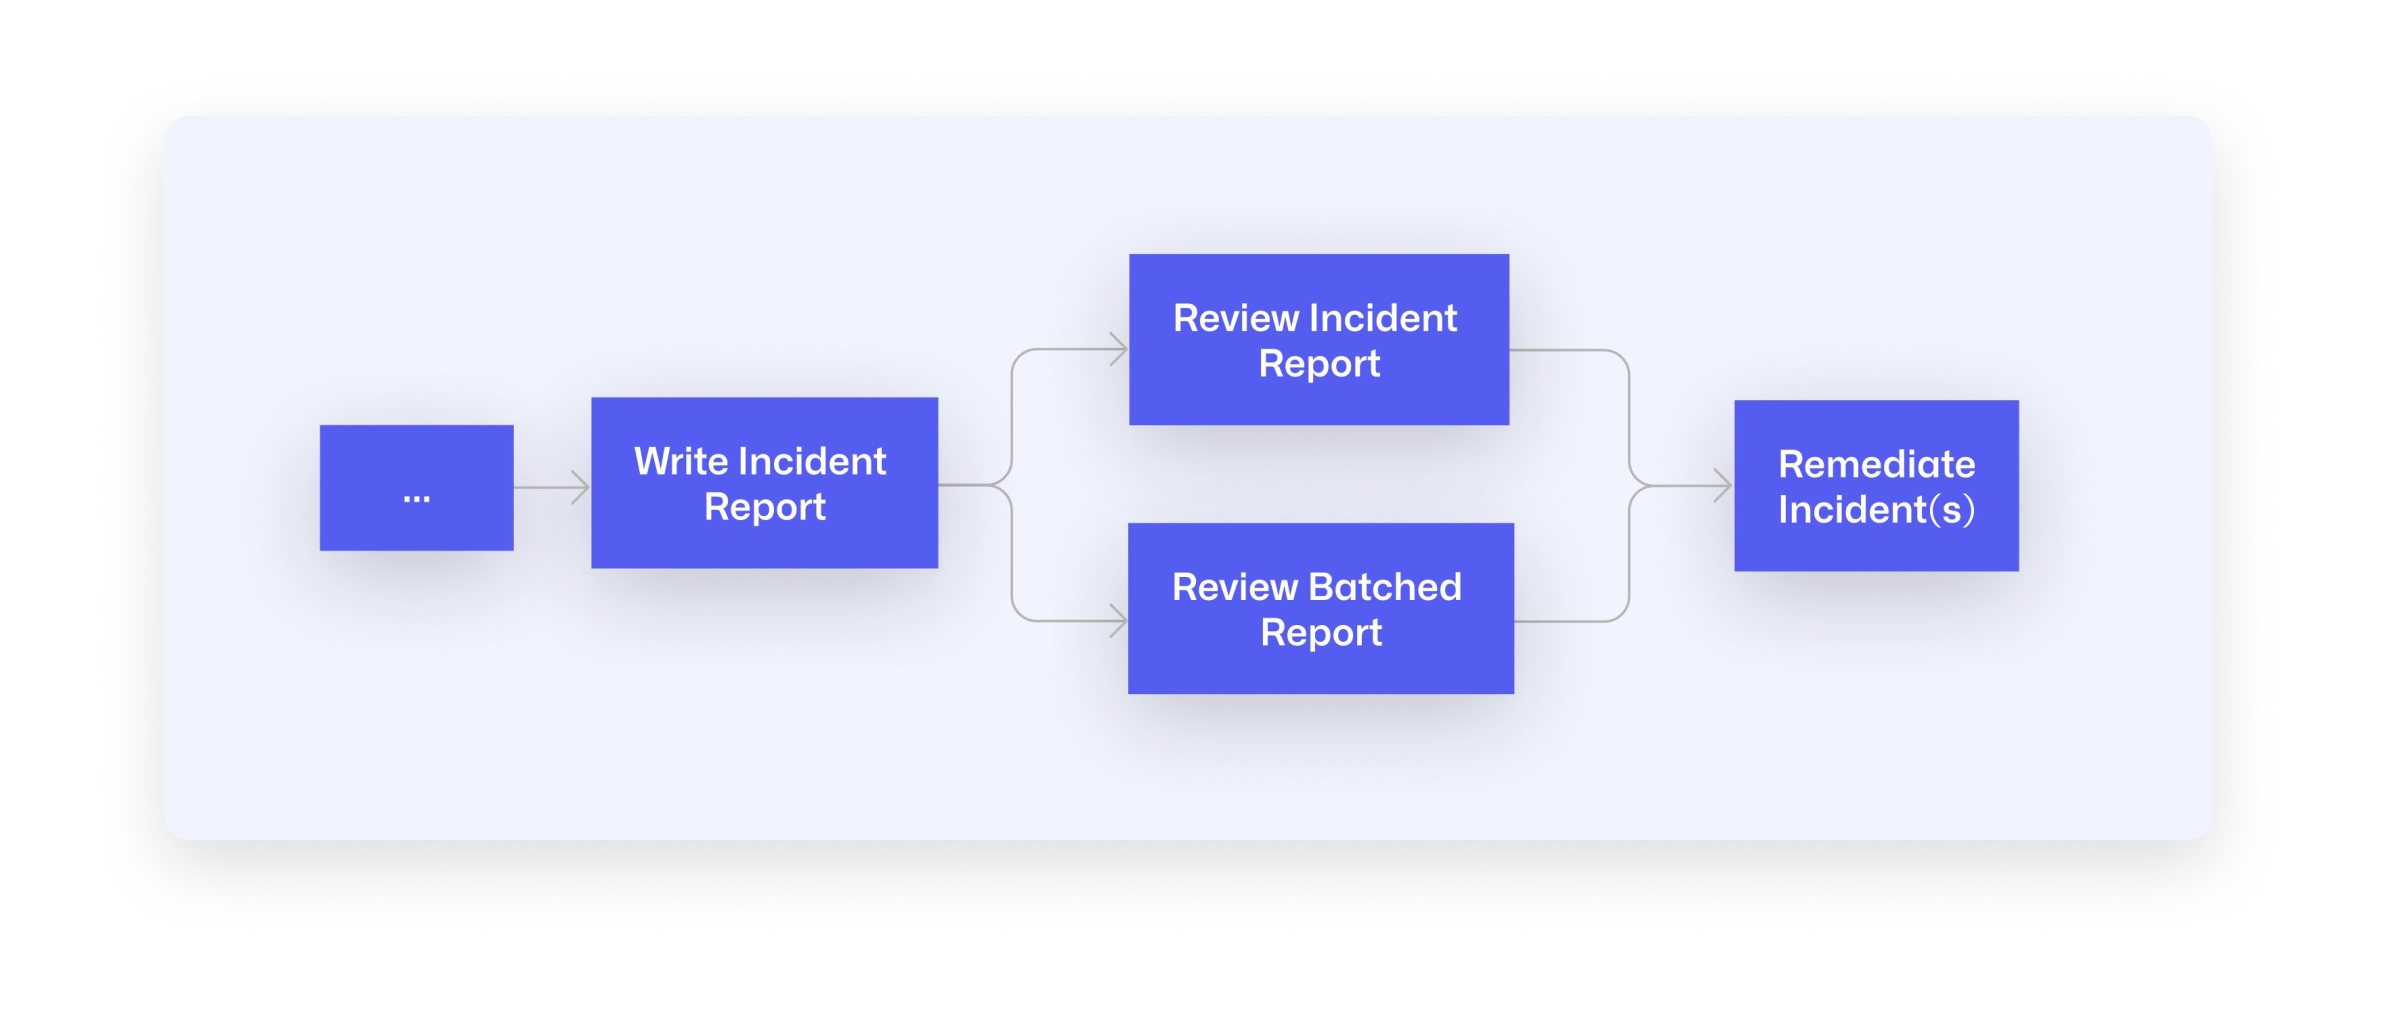 A flow chart that shows the incident response starting from "writing incident report," and breaks it out into "review incident report" and "review batched report", and then remediate incident